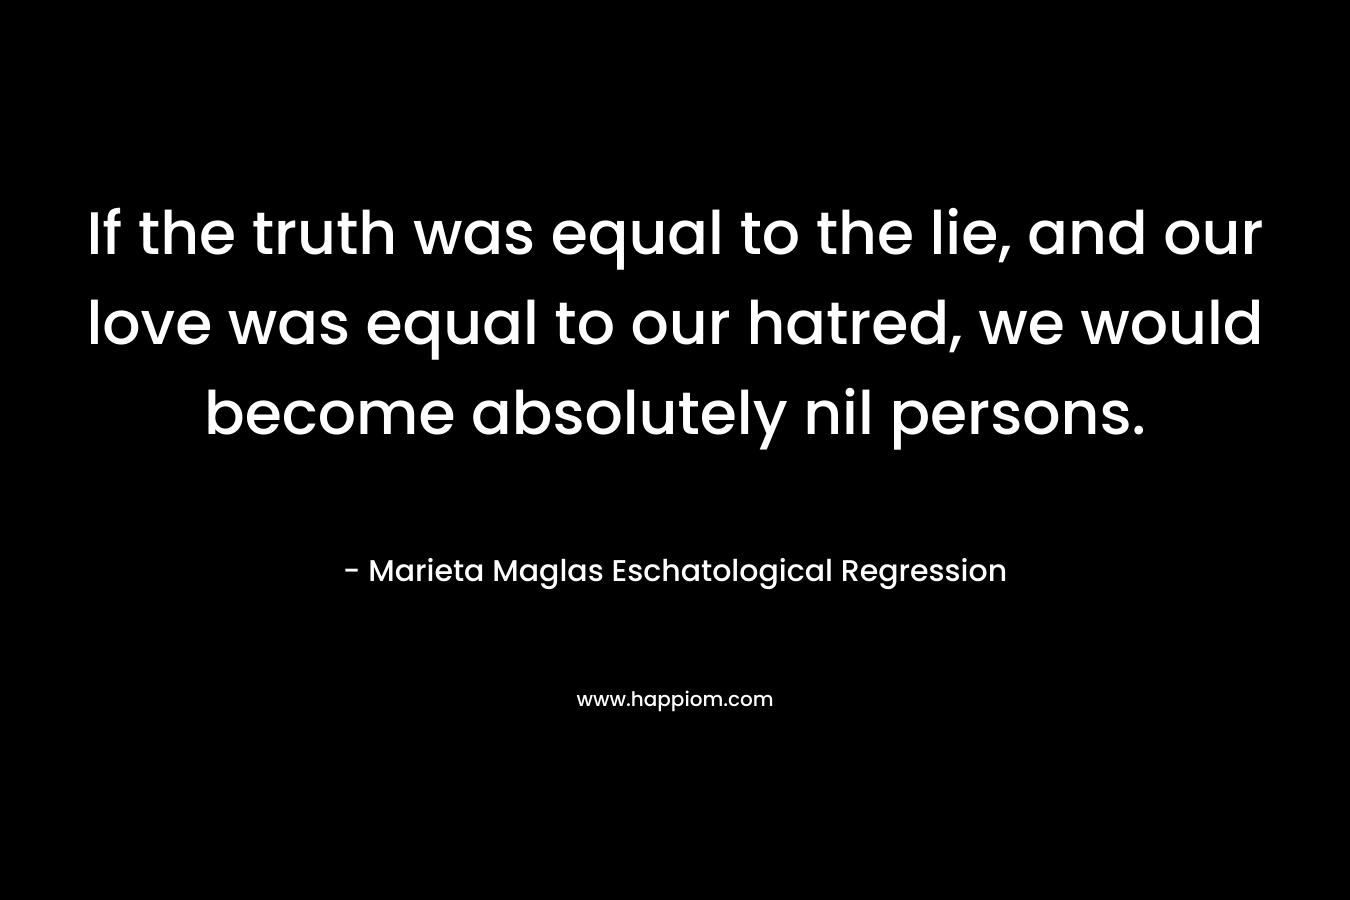 If the truth was equal to the lie, and our love was equal to our hatred, we would become absolutely nil persons. – Marieta Maglas Eschatological Regression